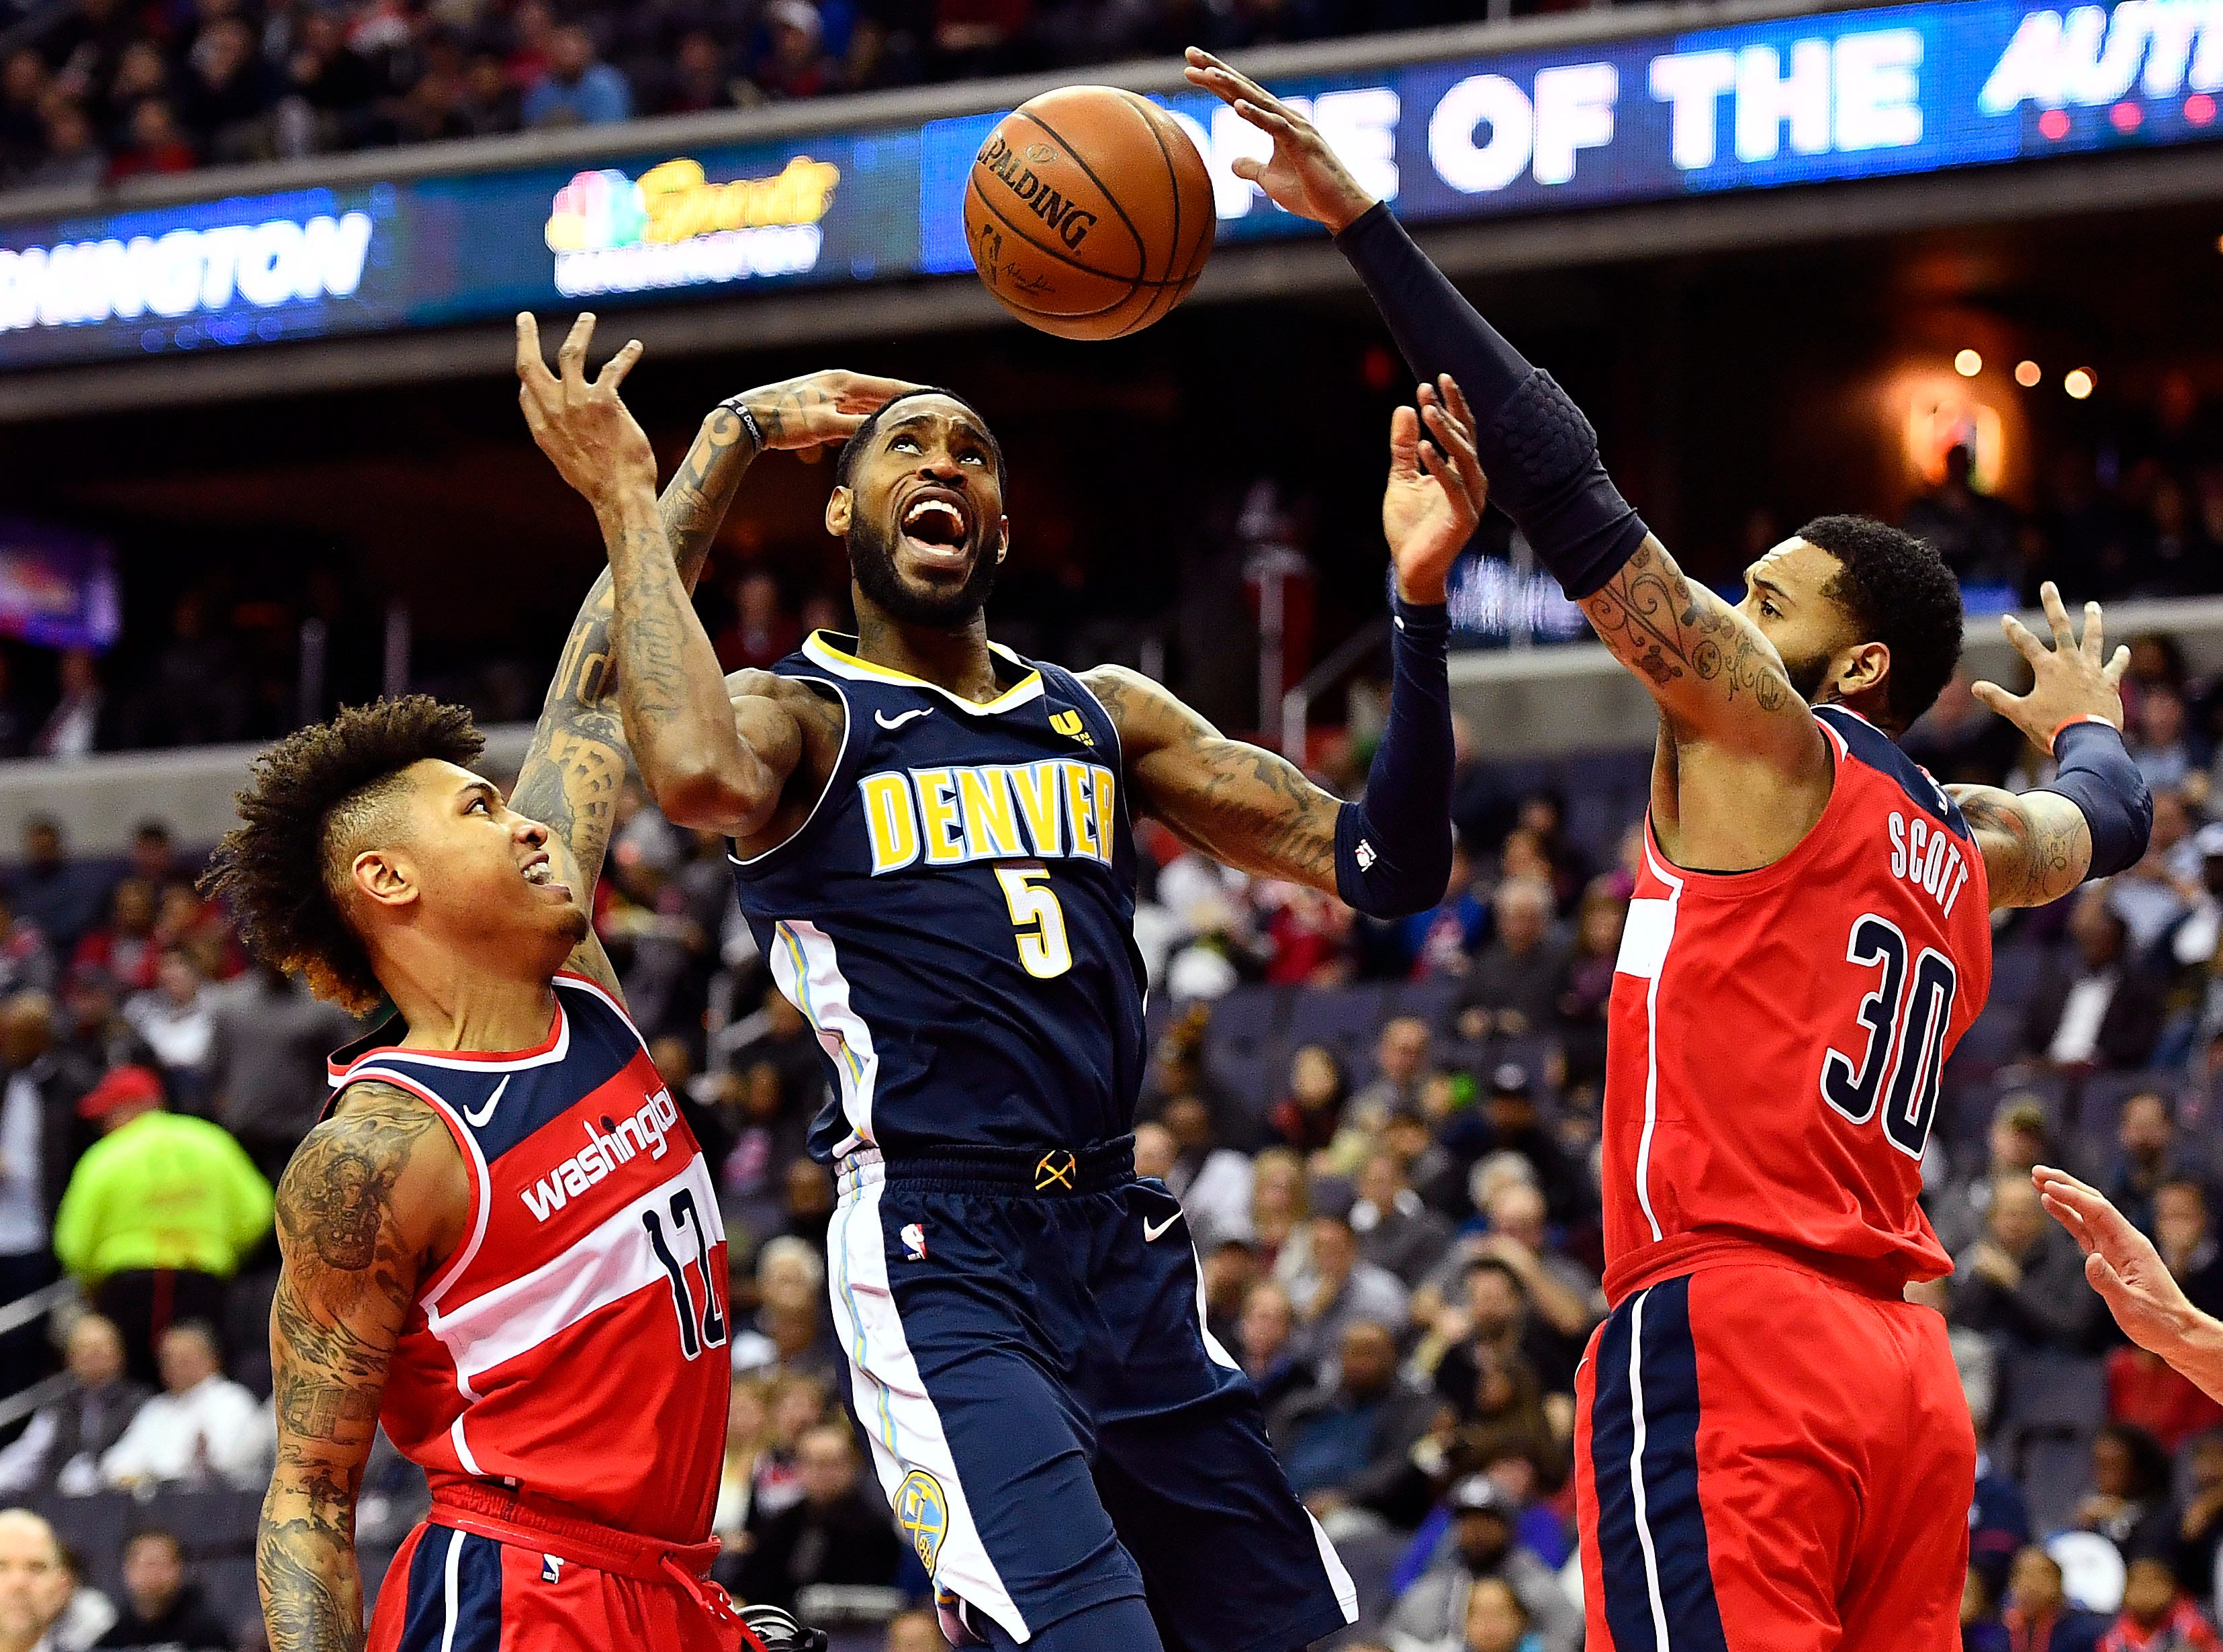 Washington Wizards forward Kelly Oubre Jr. (12) knocks the ball away from Denver Nuggets forward Will Barton (5) as Washington Wizards guard Tomas Satoransky (31) looks on during the first half at Capital One Arena.